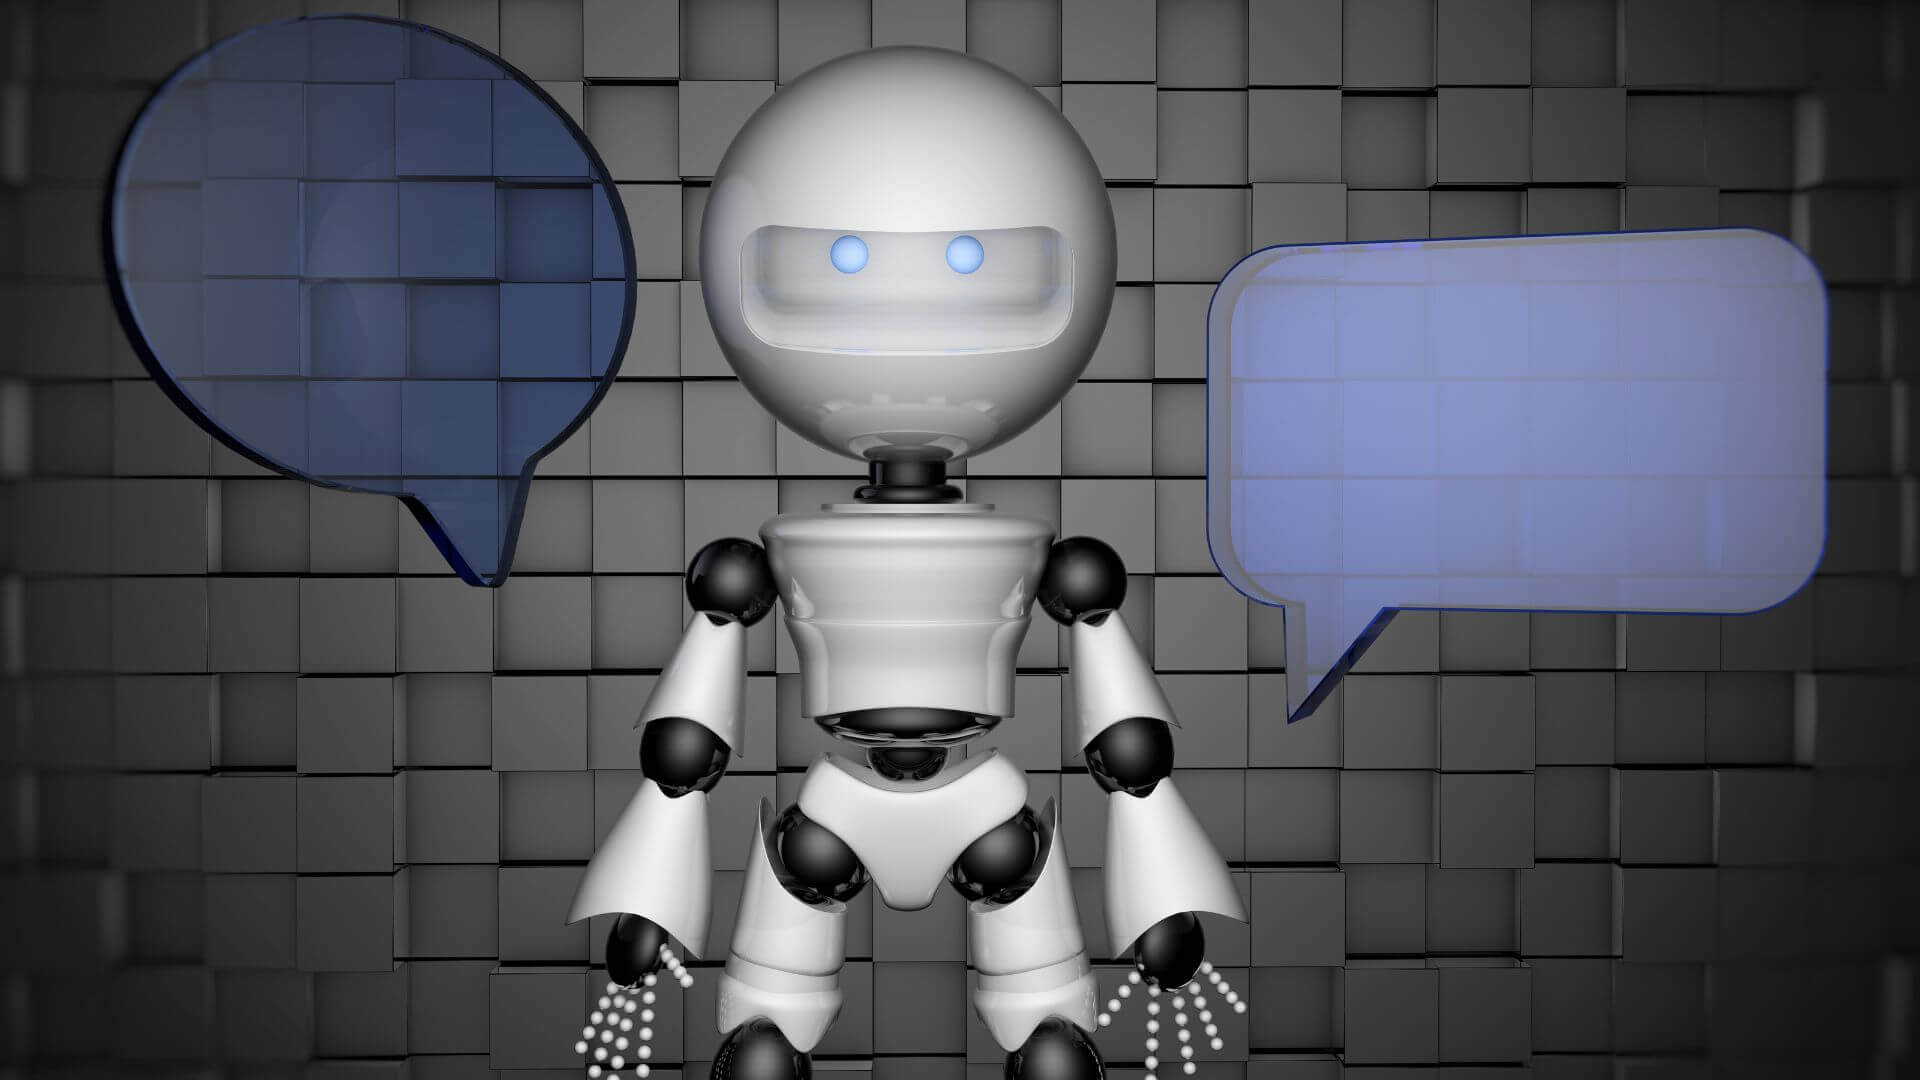 learn english with robot friend app